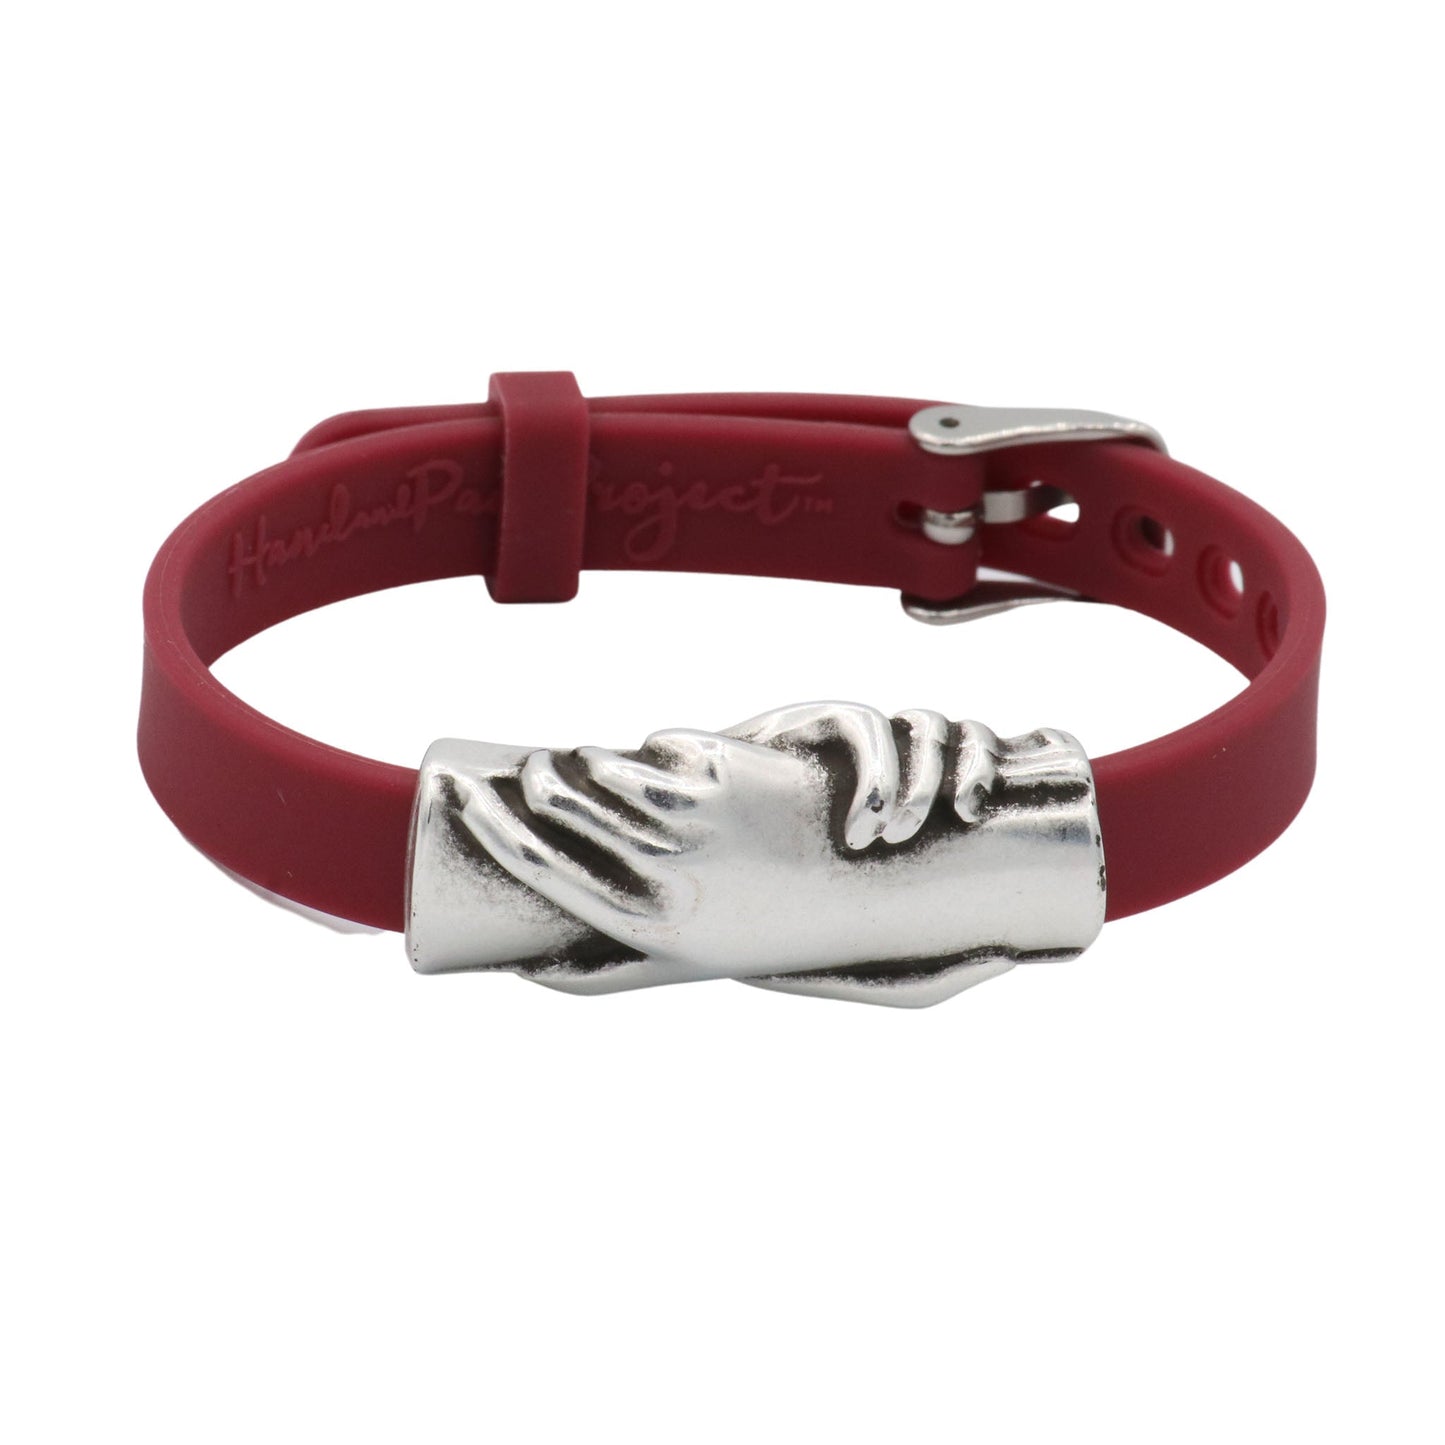 ACTIVEWEAR Hand and Hand Bracelet